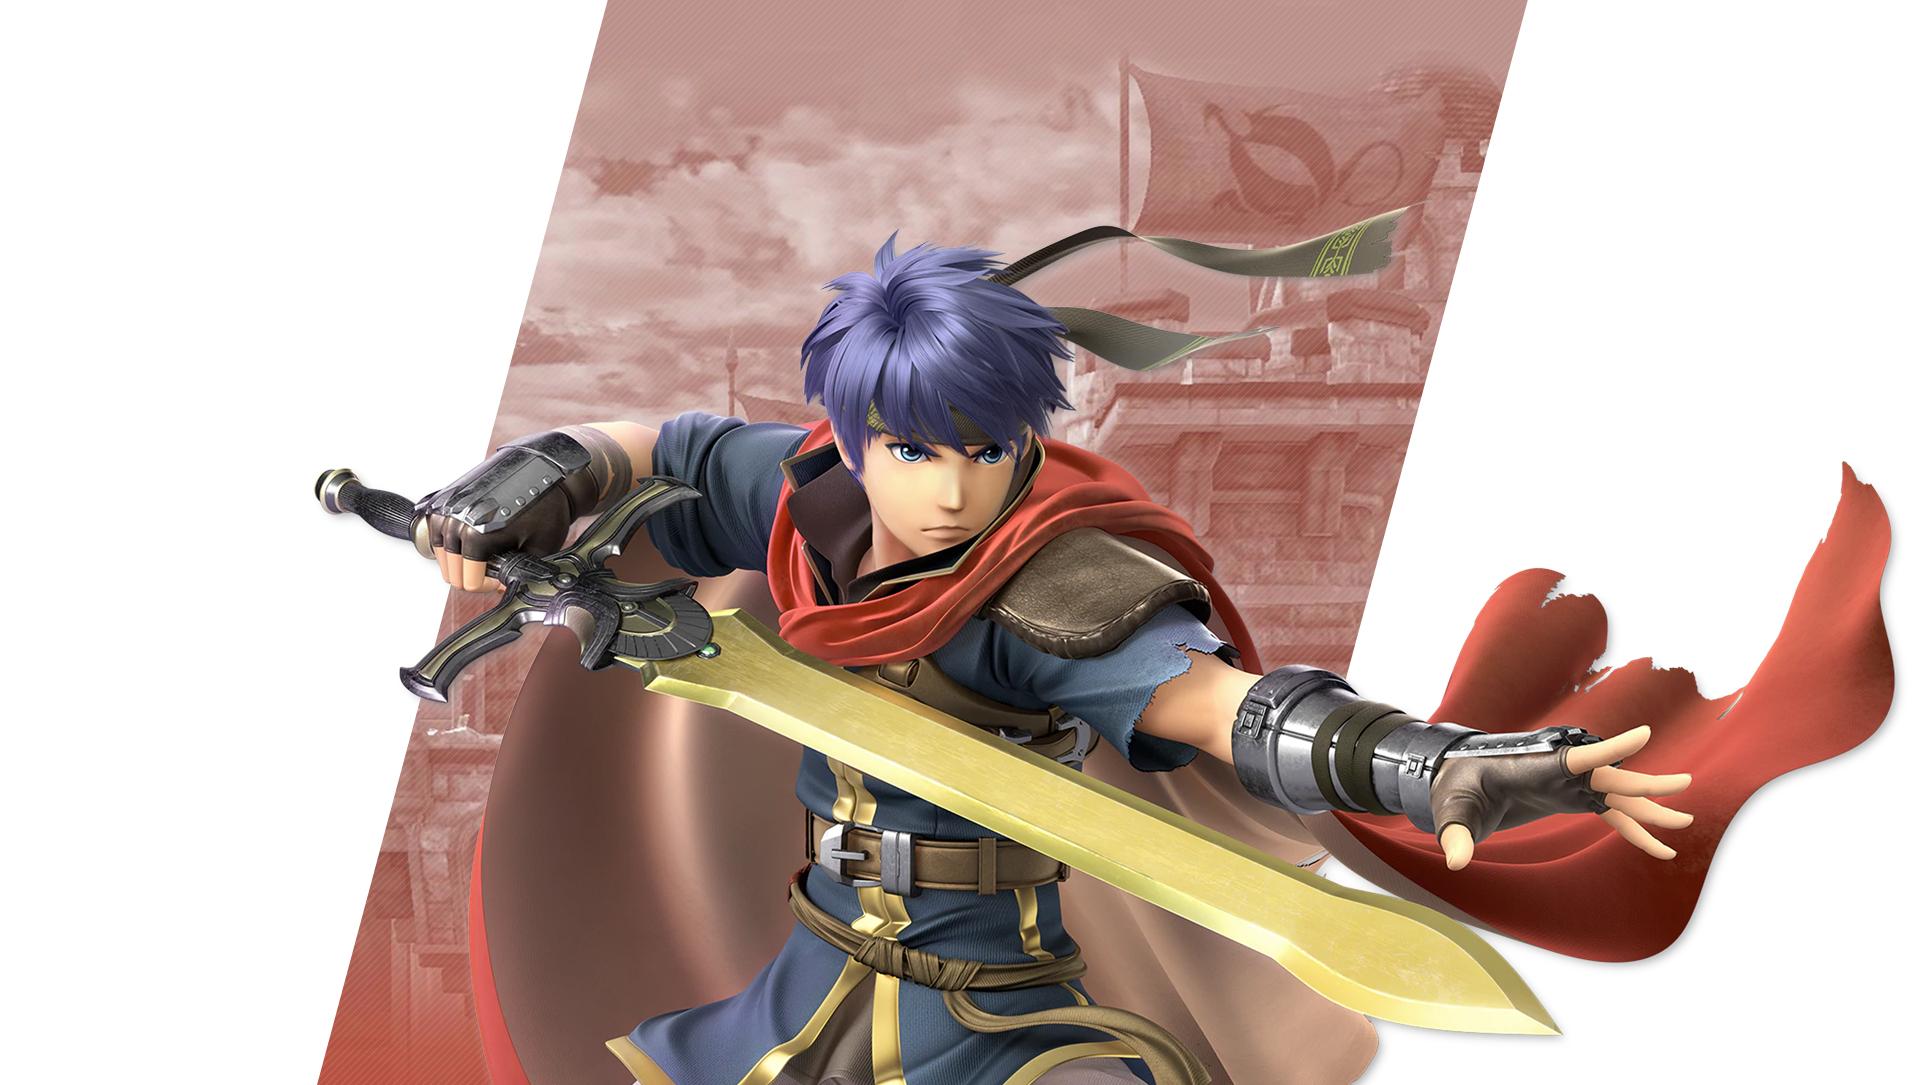 Super Smash Bros Ultimate Ike Wallpaper. Cat with Monocle